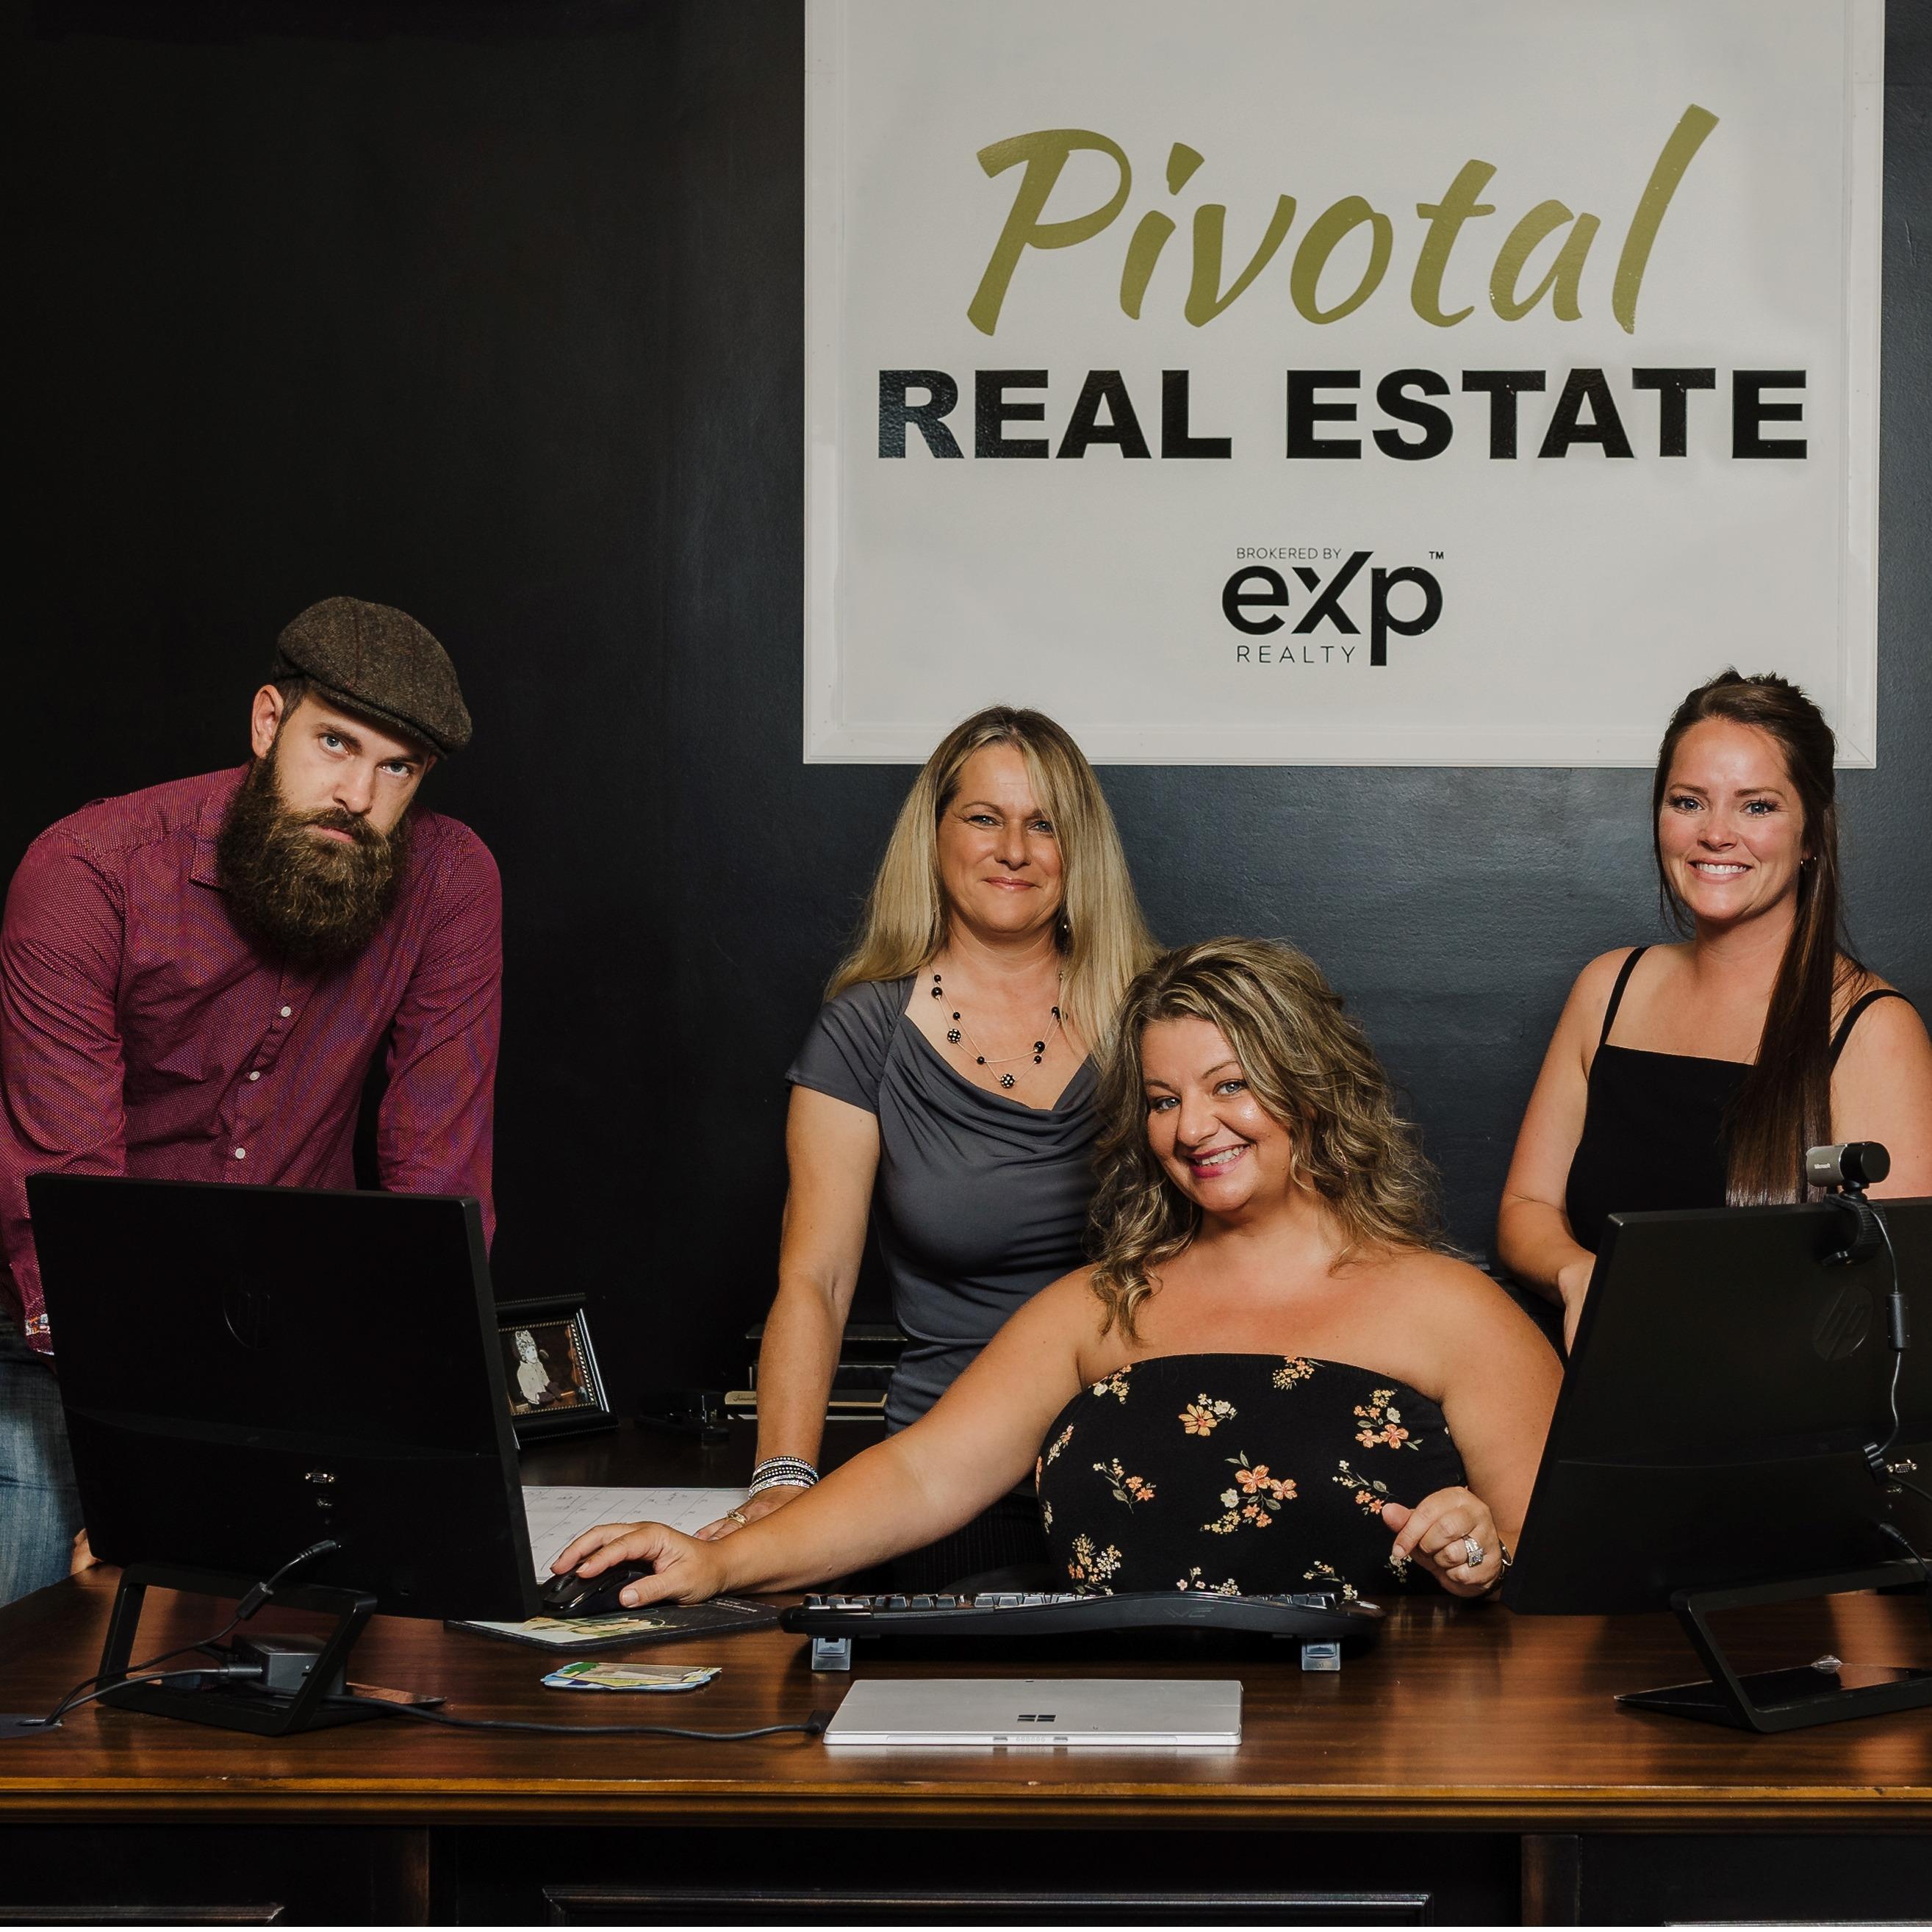 Pivotal Real Estate brokered by EXP